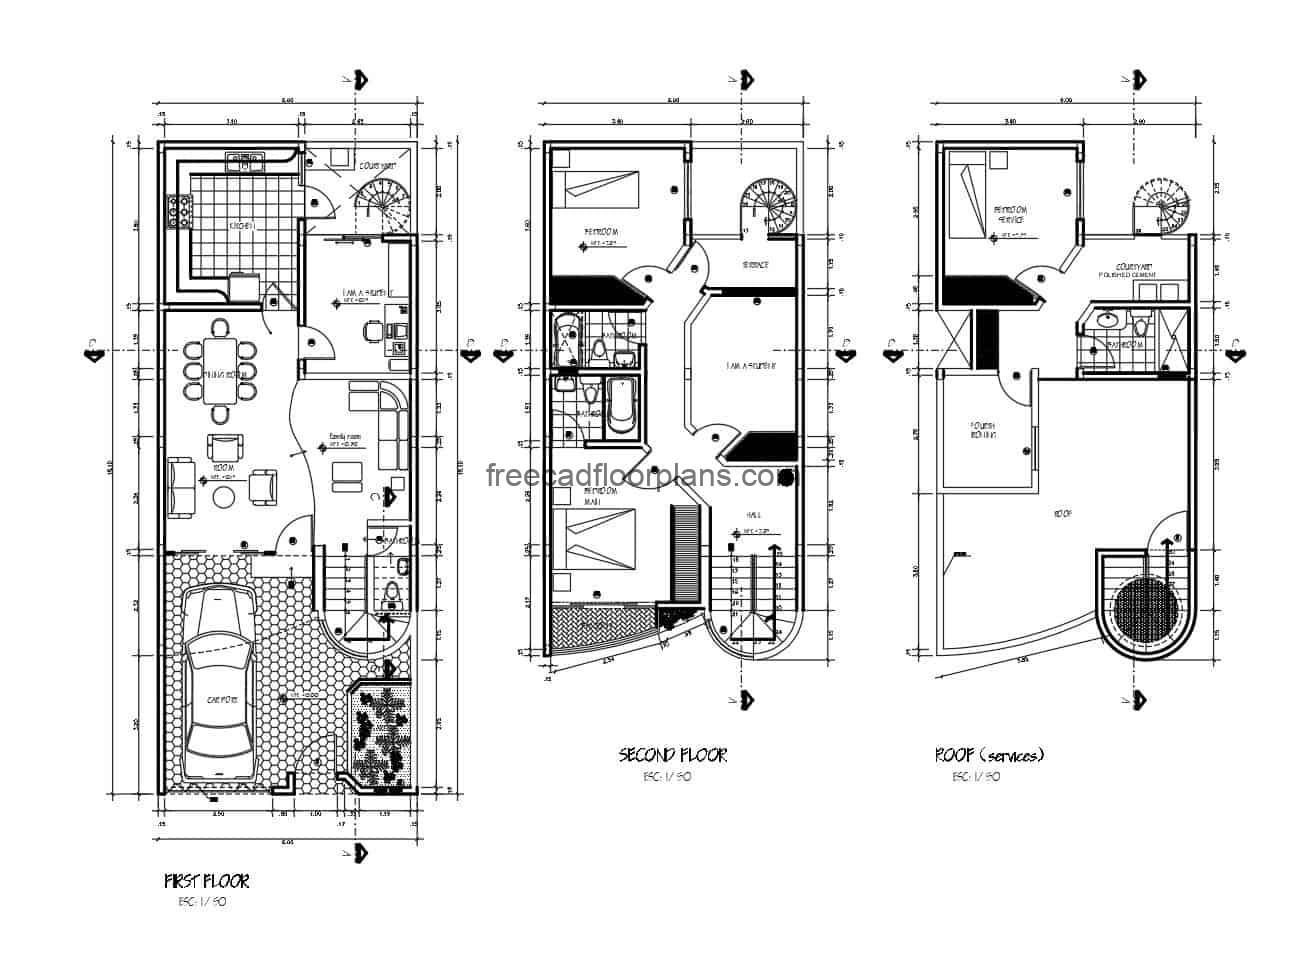 Architectural project of two-level residence with three rooms and terrace, complete plans in autocad, technical details